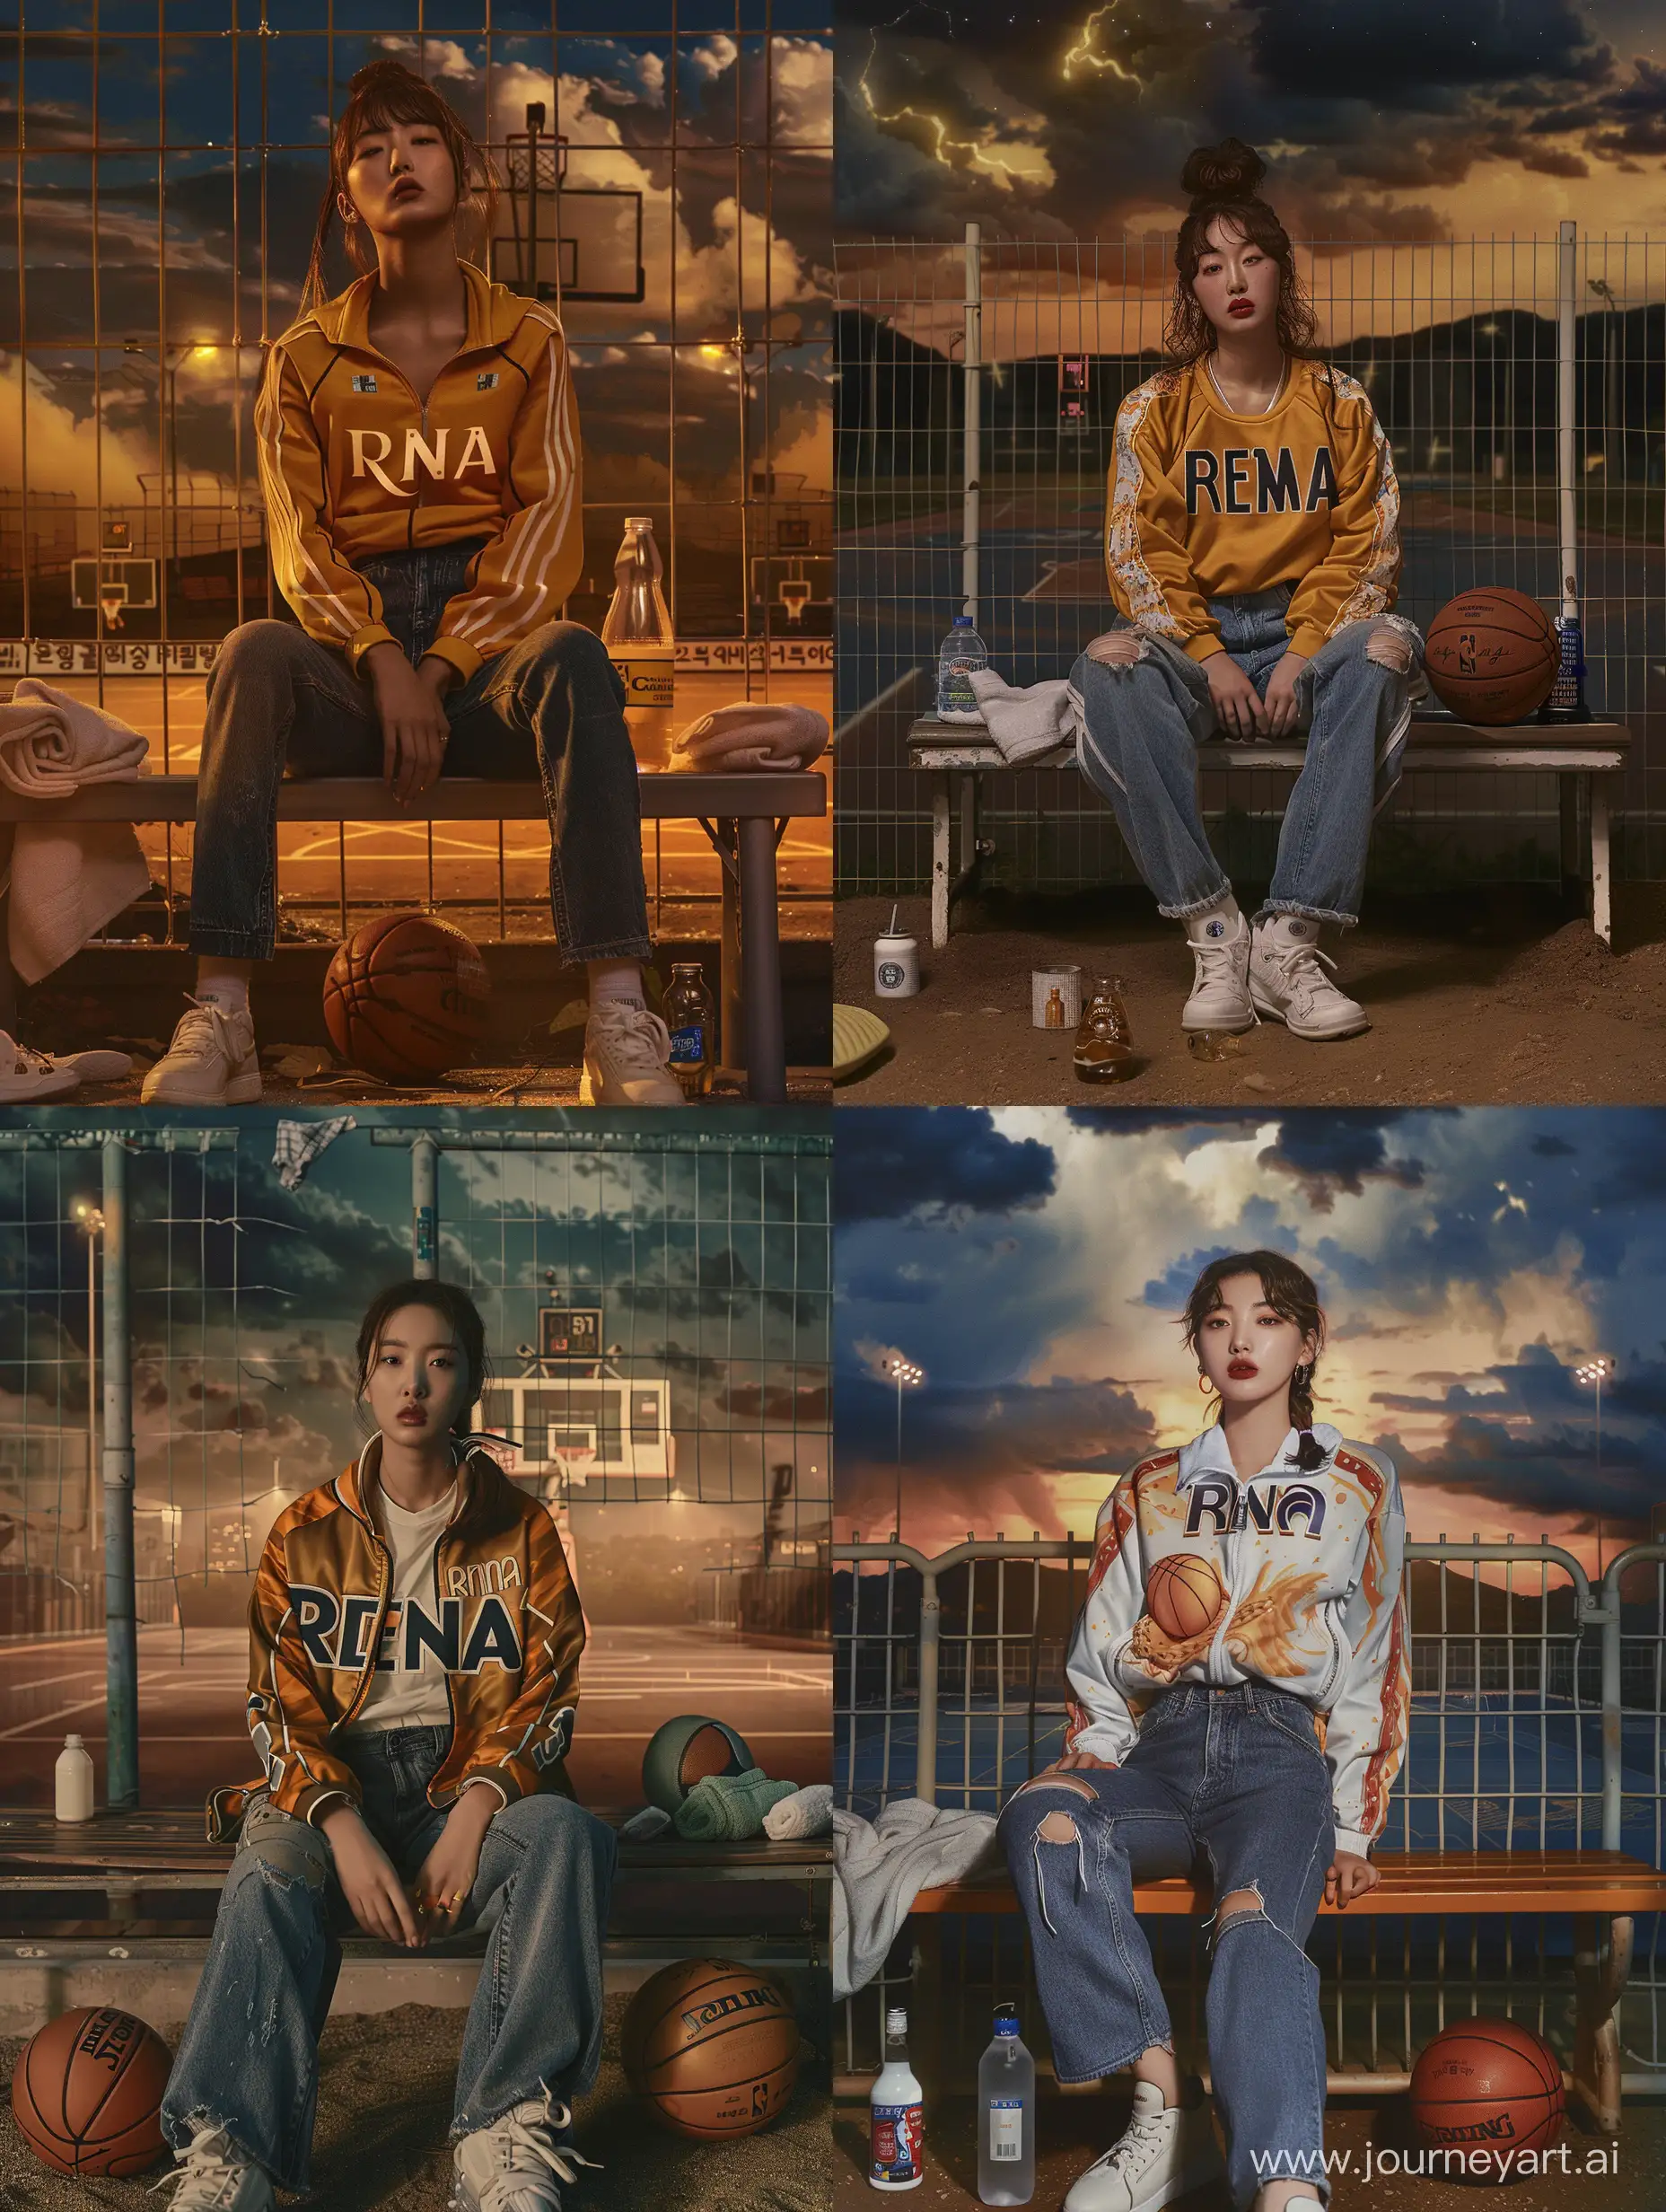 Realistic-Korean-Woman-in-RENA-Basketball-Tracksuit-on-Bench-at-Night